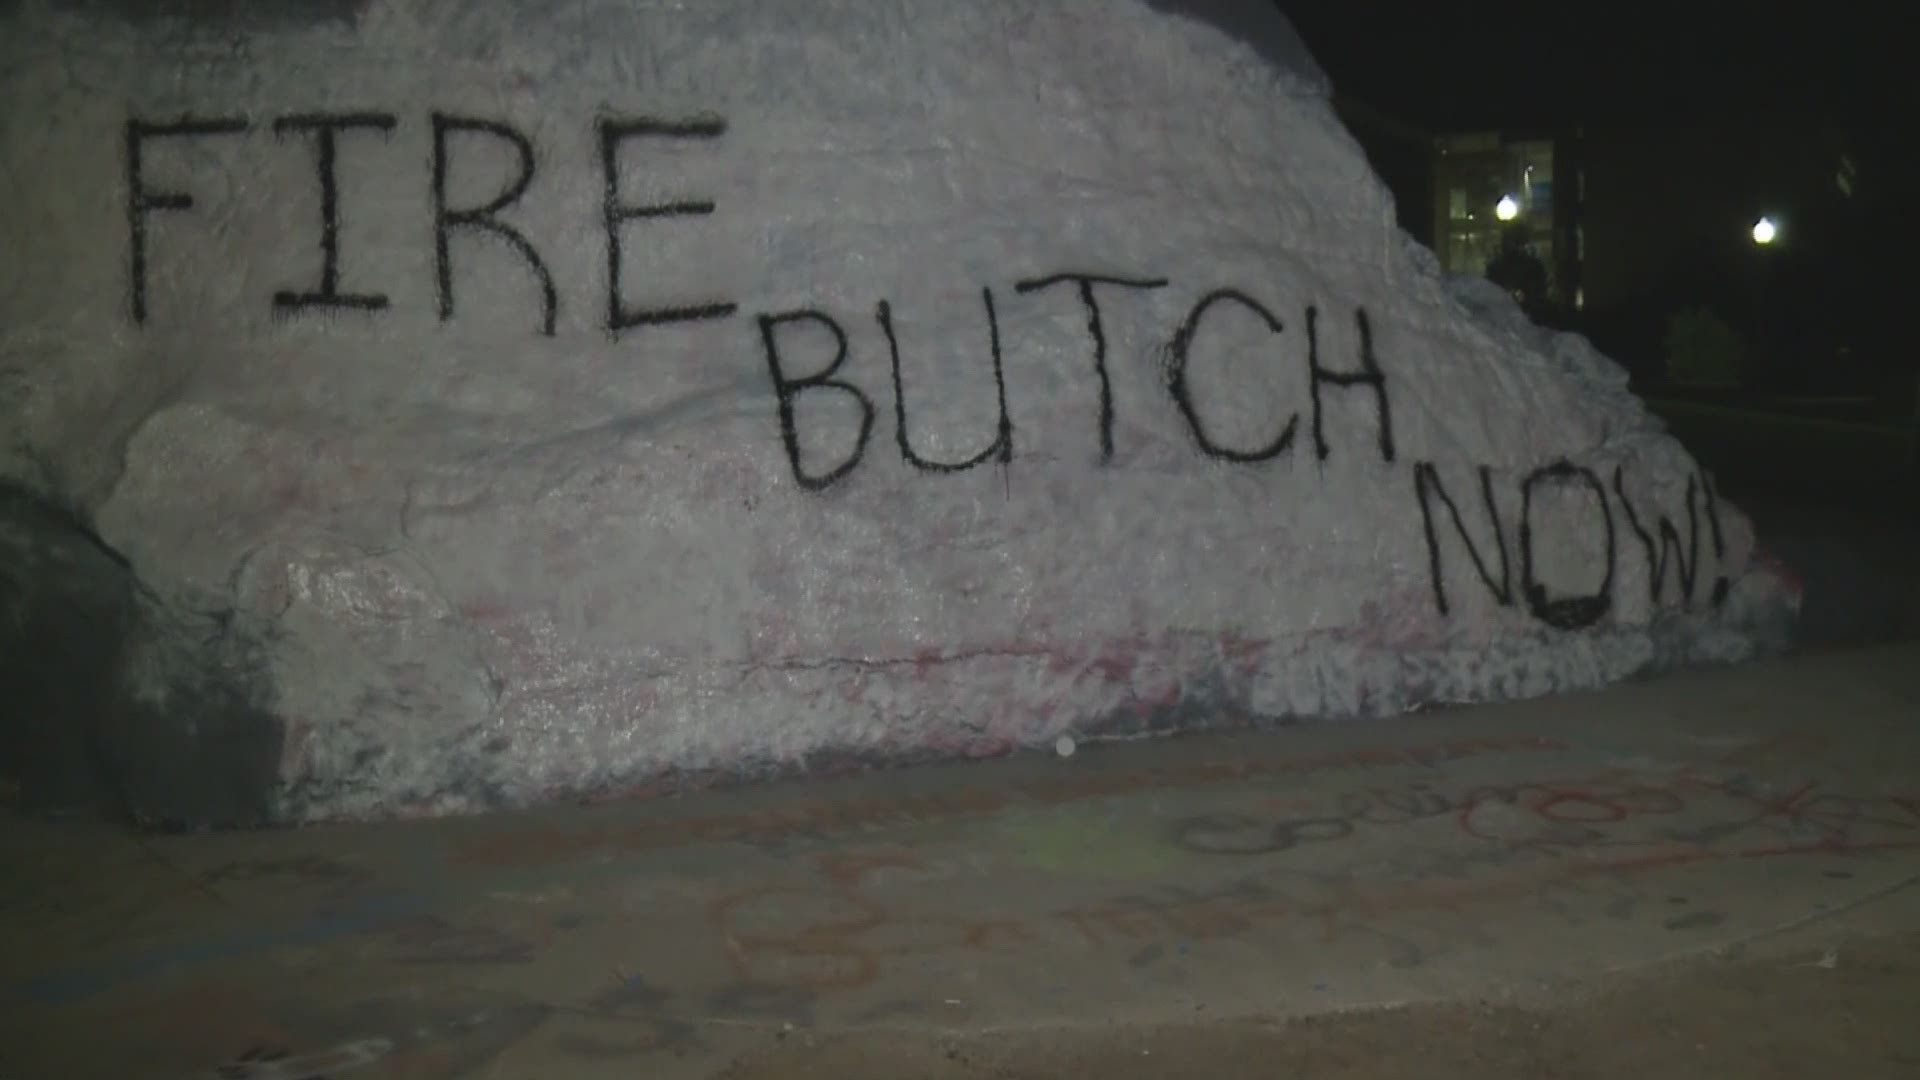 The rock on UT's campus was painted white overnight and someone wrote 'FIRE BUTCH NOW' on it. However, that didn't last long. By 1 p.m. Tuesday, it was already painted over.